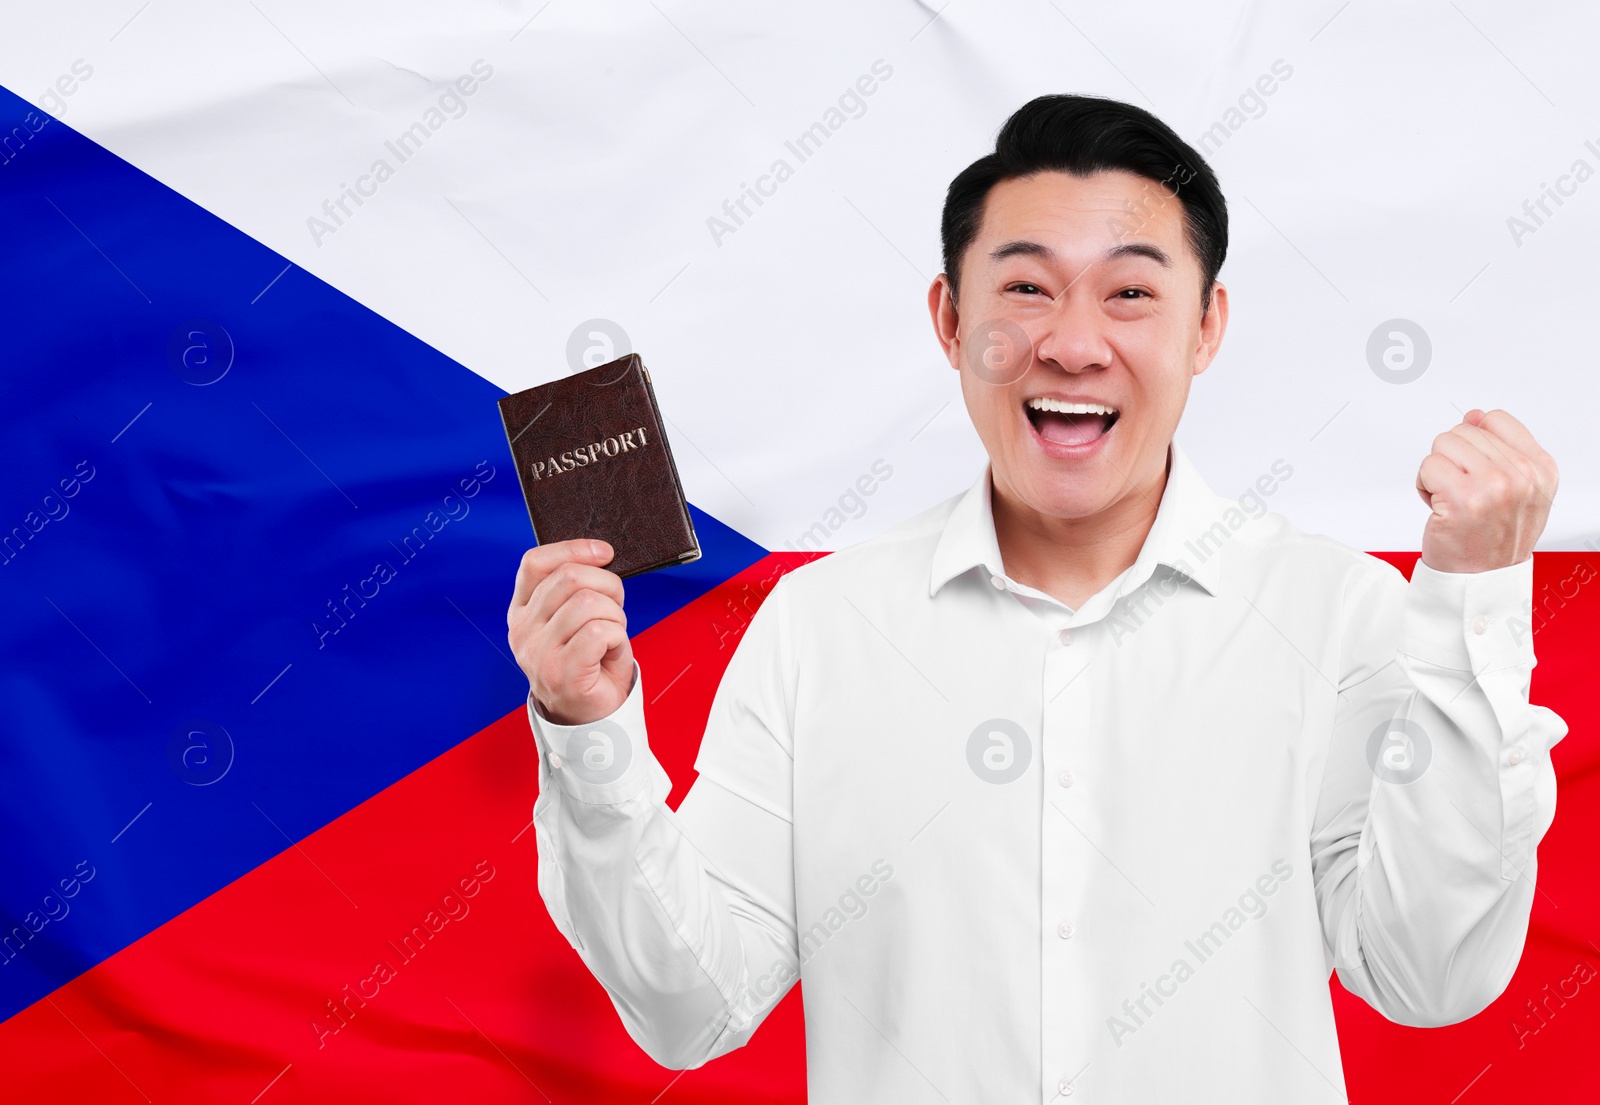 Image of Immigration. Happy man with passport against national flagCzech Republic, space for text